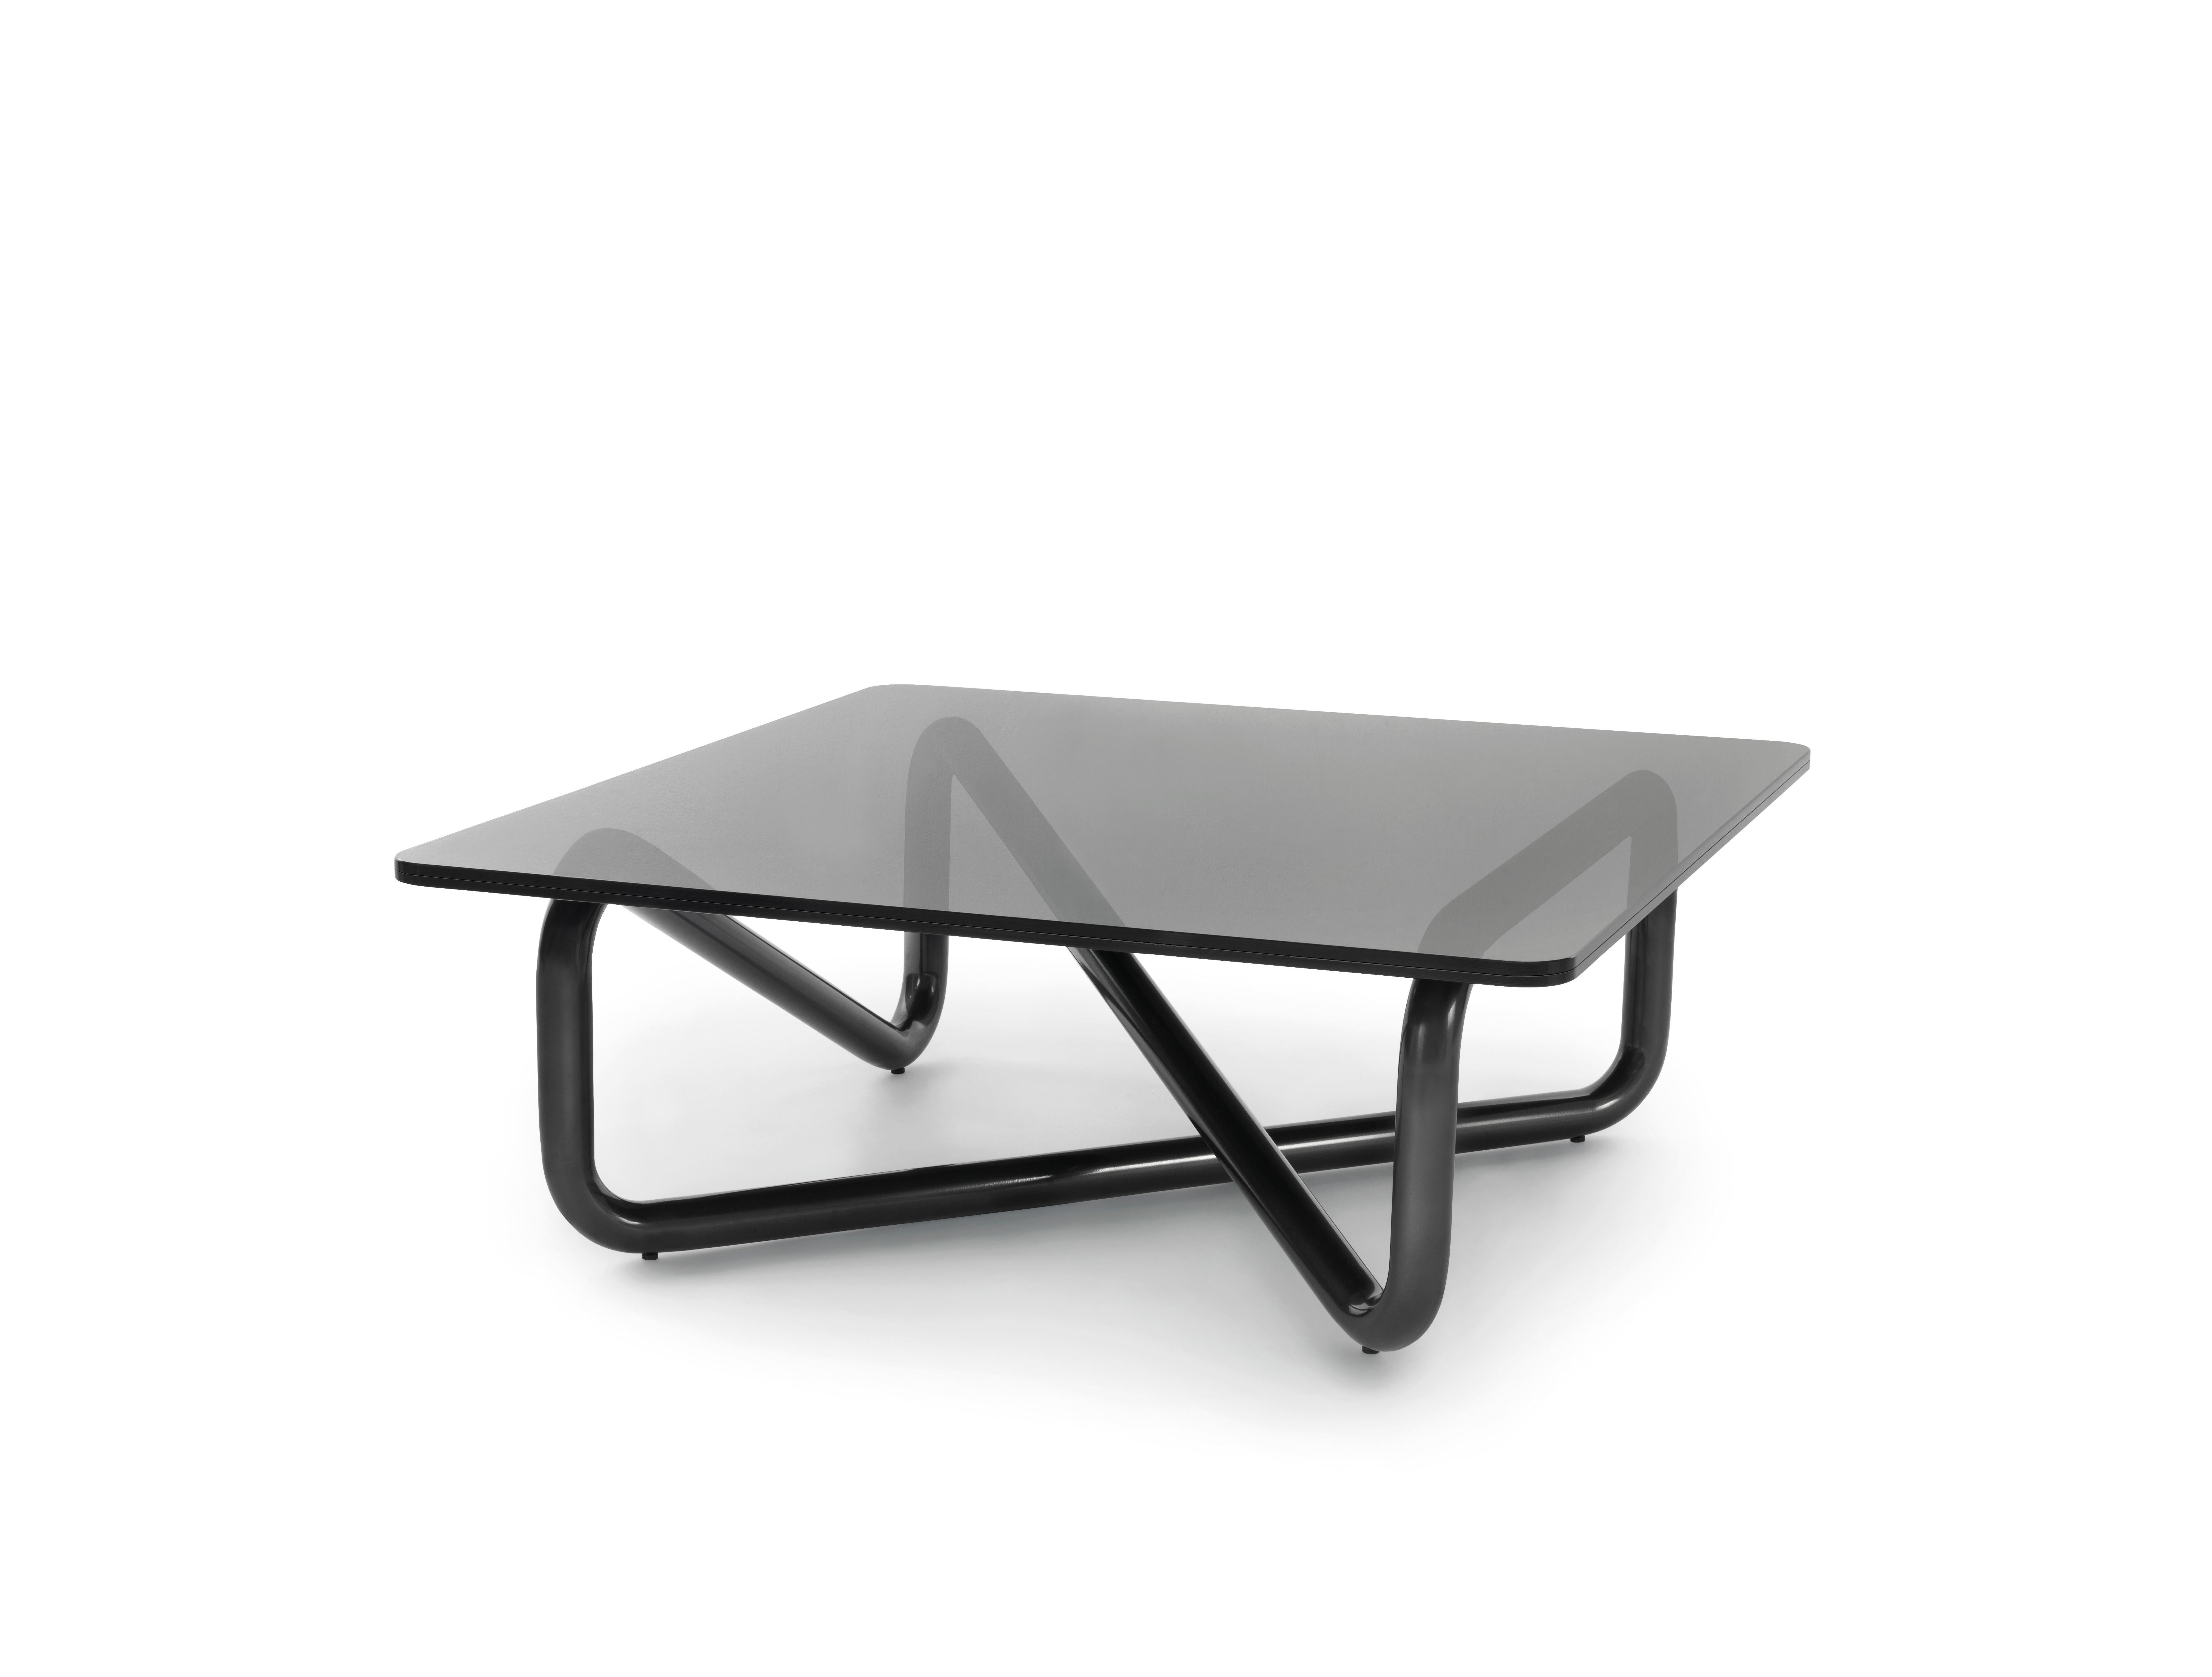 Arflex Infinity Small Table in Fume Glass with Grey Base by Claesson Koivisto Rune. The mathematical symbol of eternity is a figure that resembles a horizontal figure 8. The analogy is of course that if you follow the line it will take you eternity